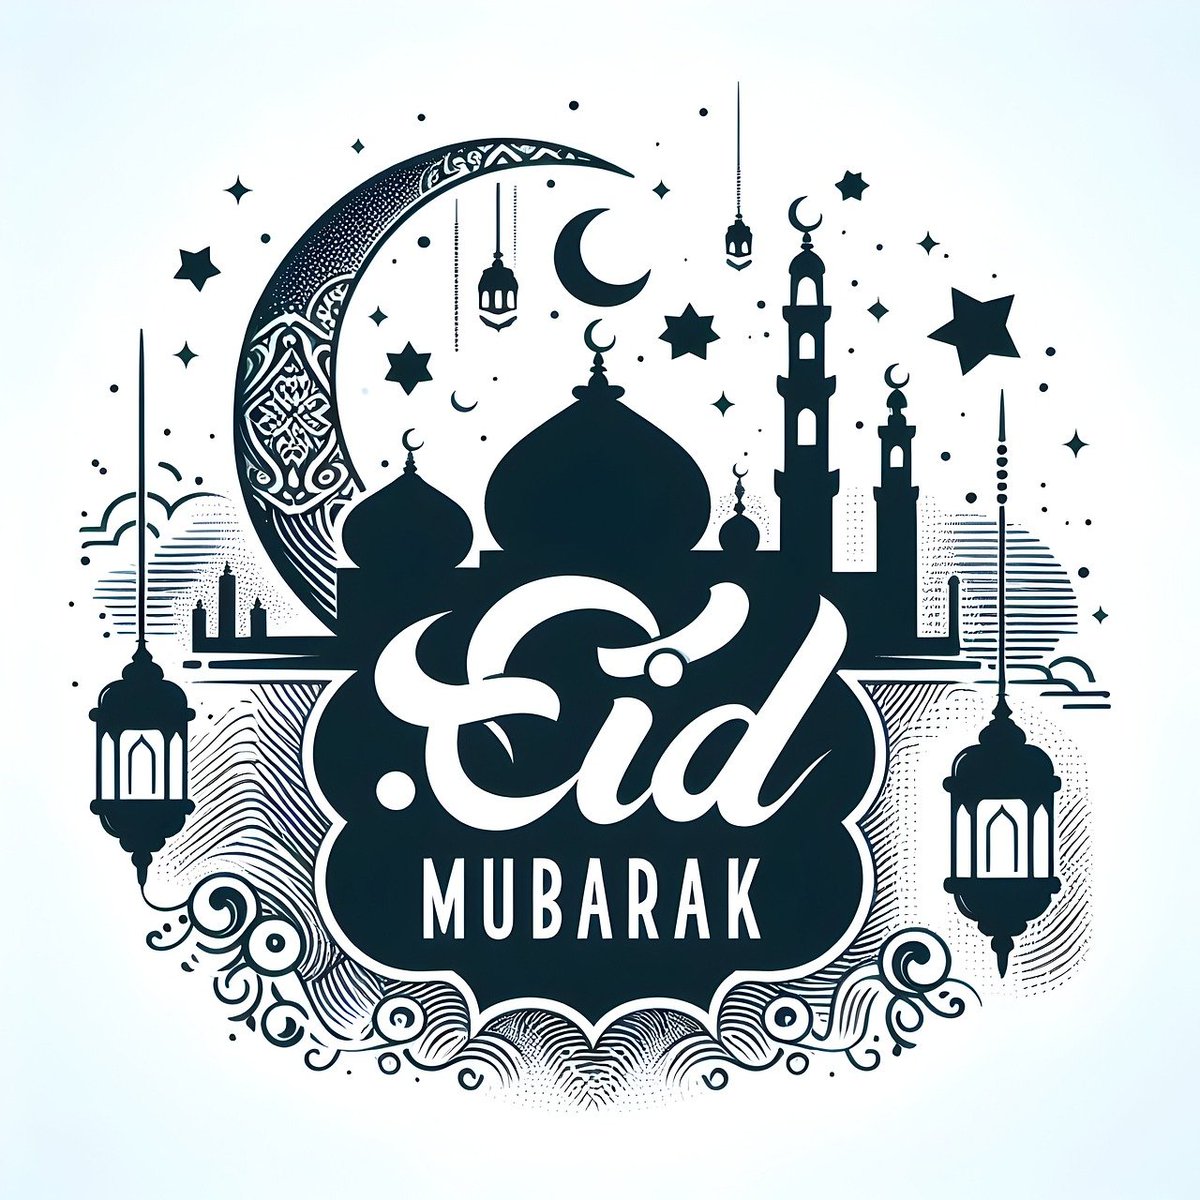 A very happy Eid to our customers, partners, employees and everyone who is celebrating over the next few days. #EidMubarak ✨